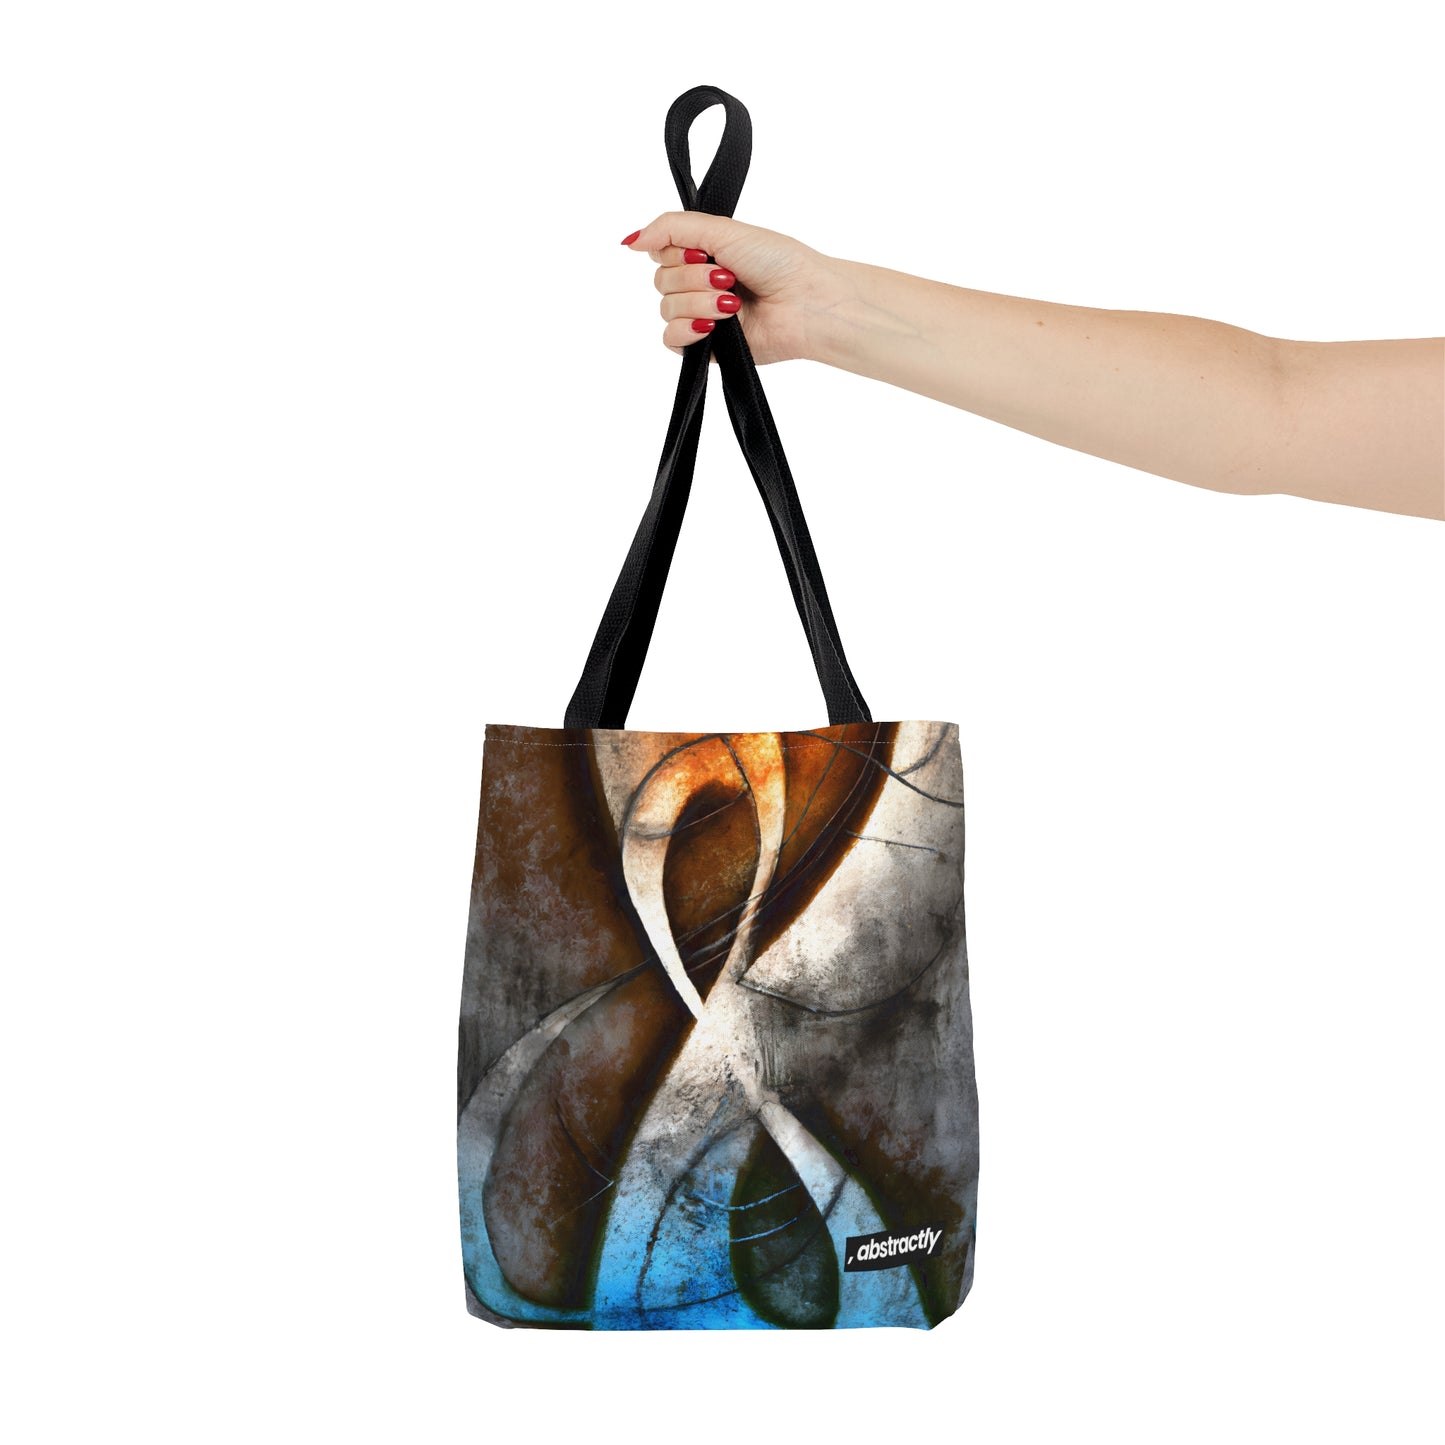 Theodore Calhoun - Spring Force, Abstractly - Tote